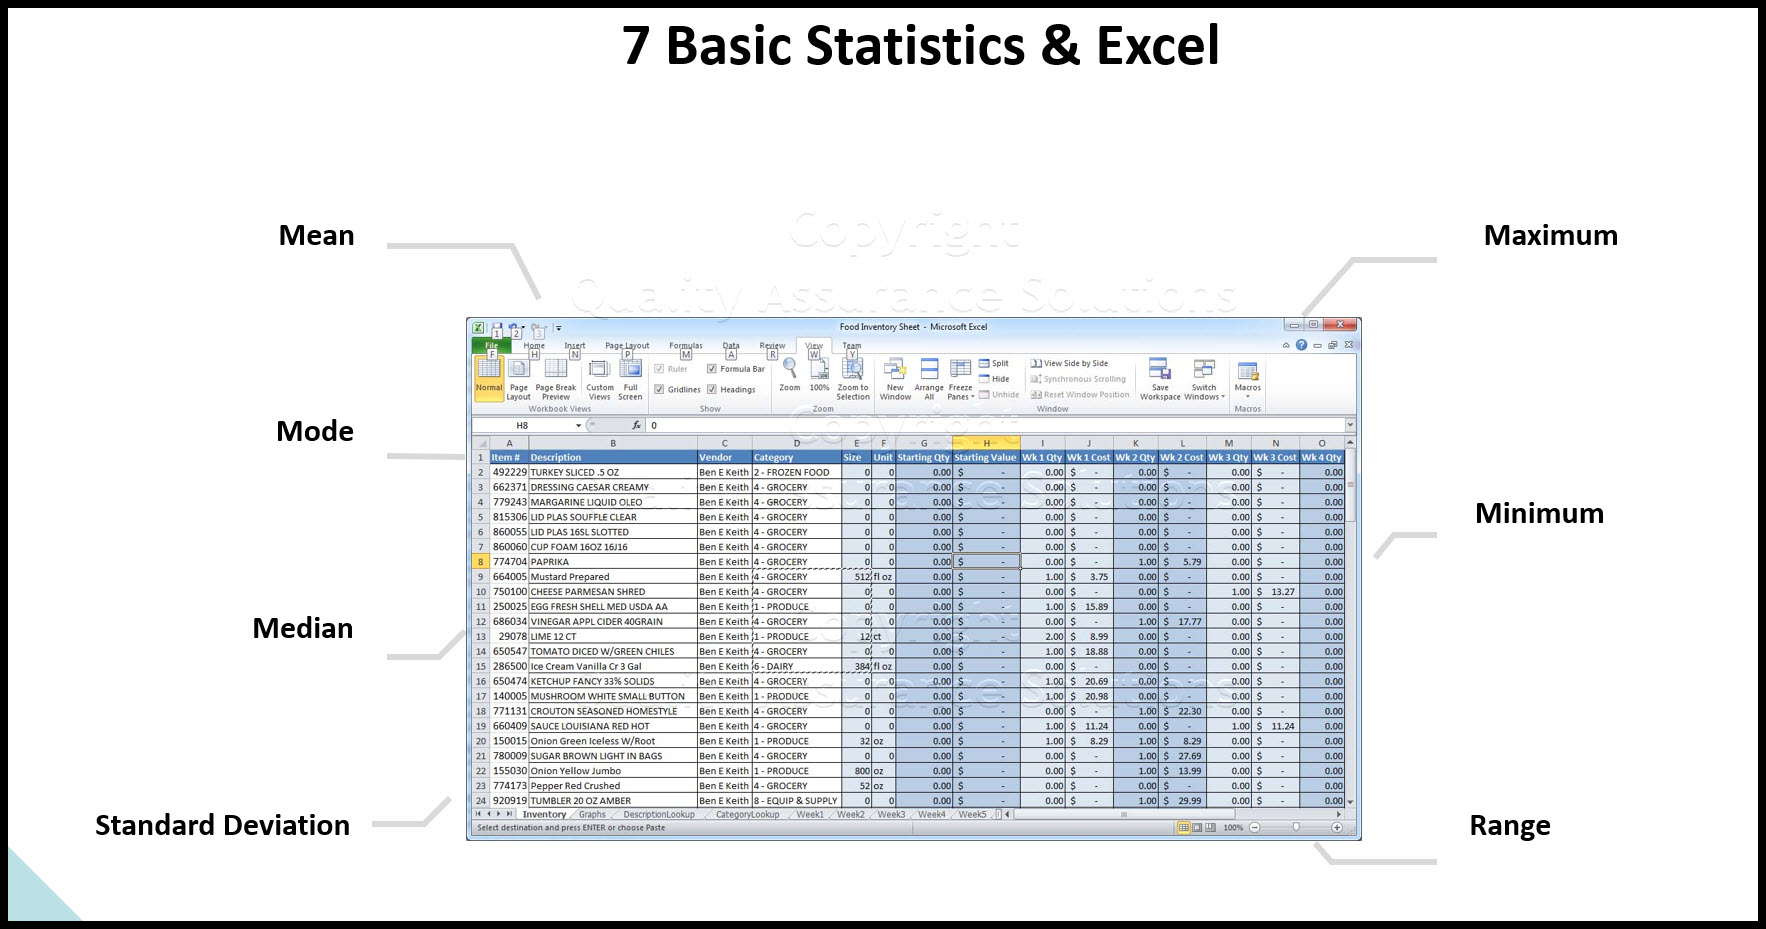 Data analysis in excel discusses calculating averages, ranges, and standard deviation in  Microsoft Excel.